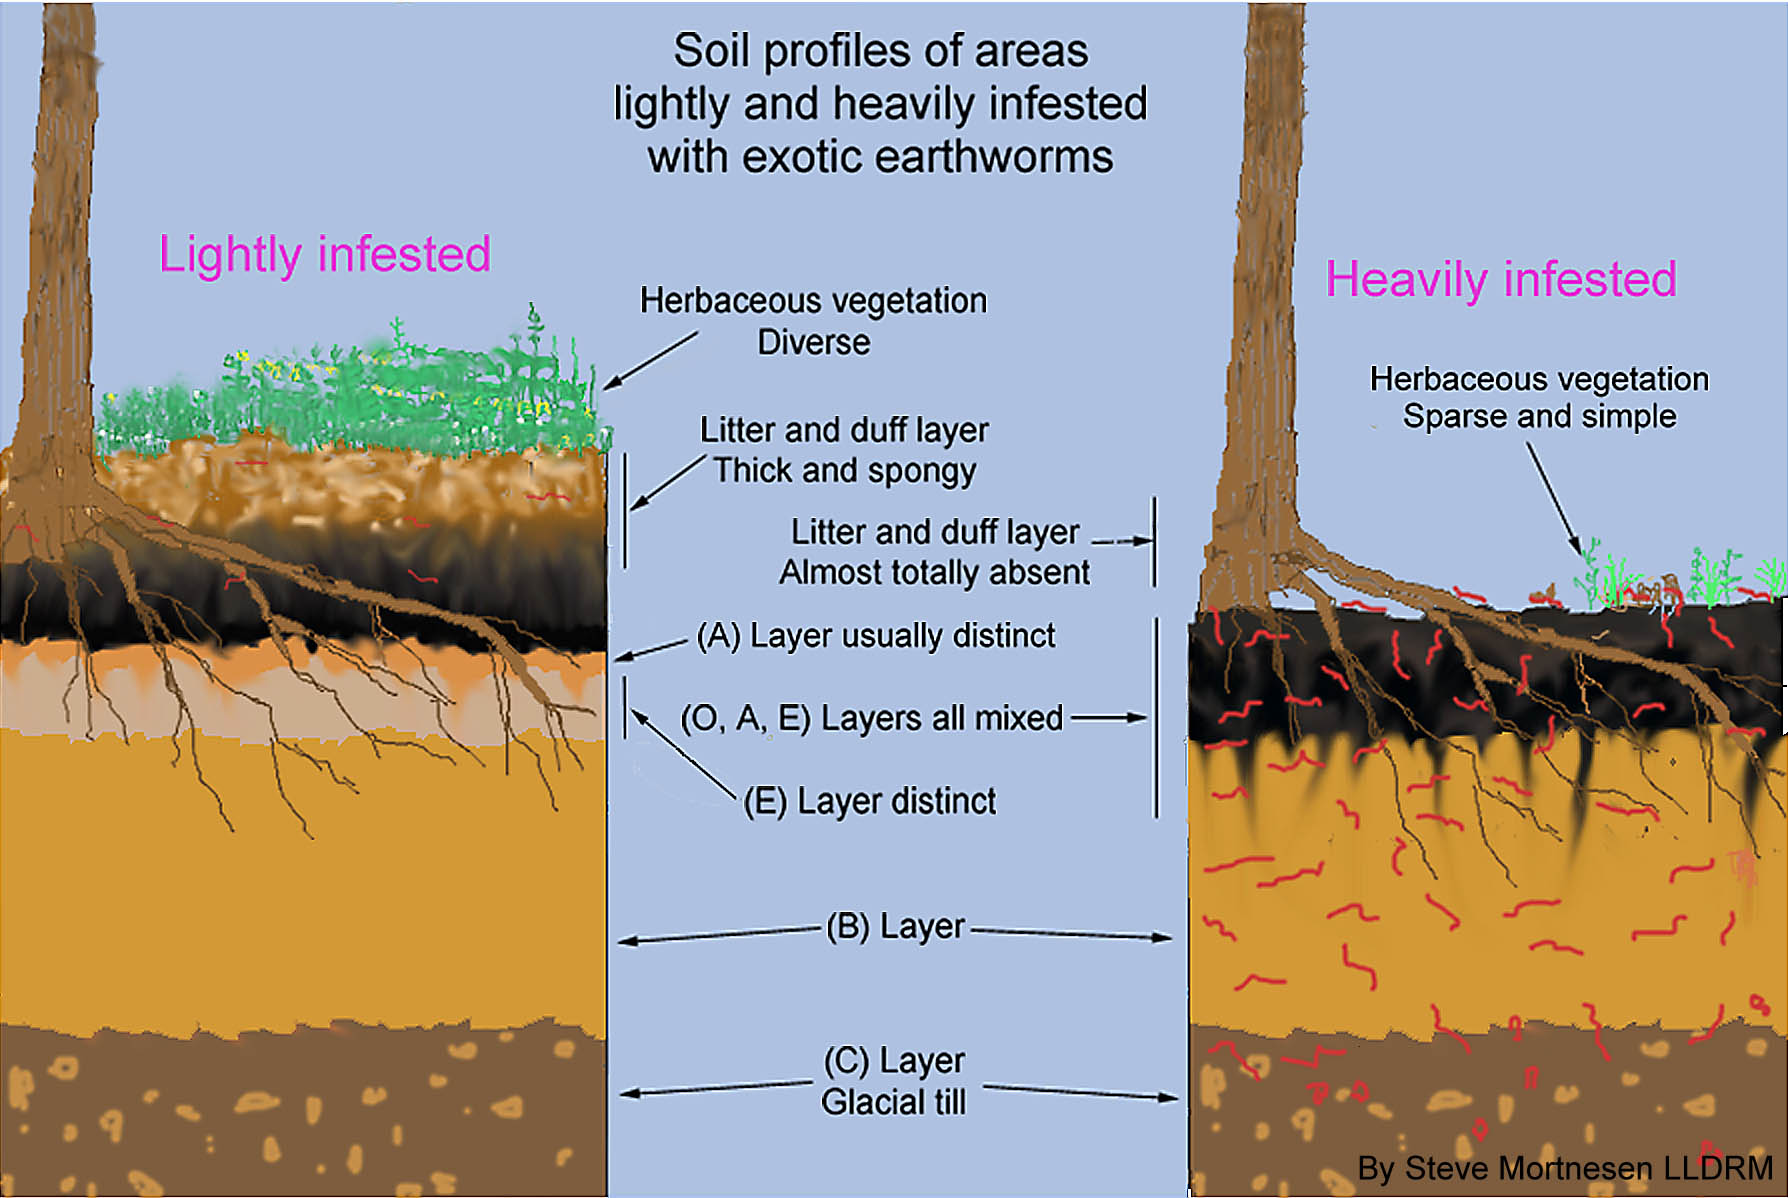 Illustration of soil horizons described in text